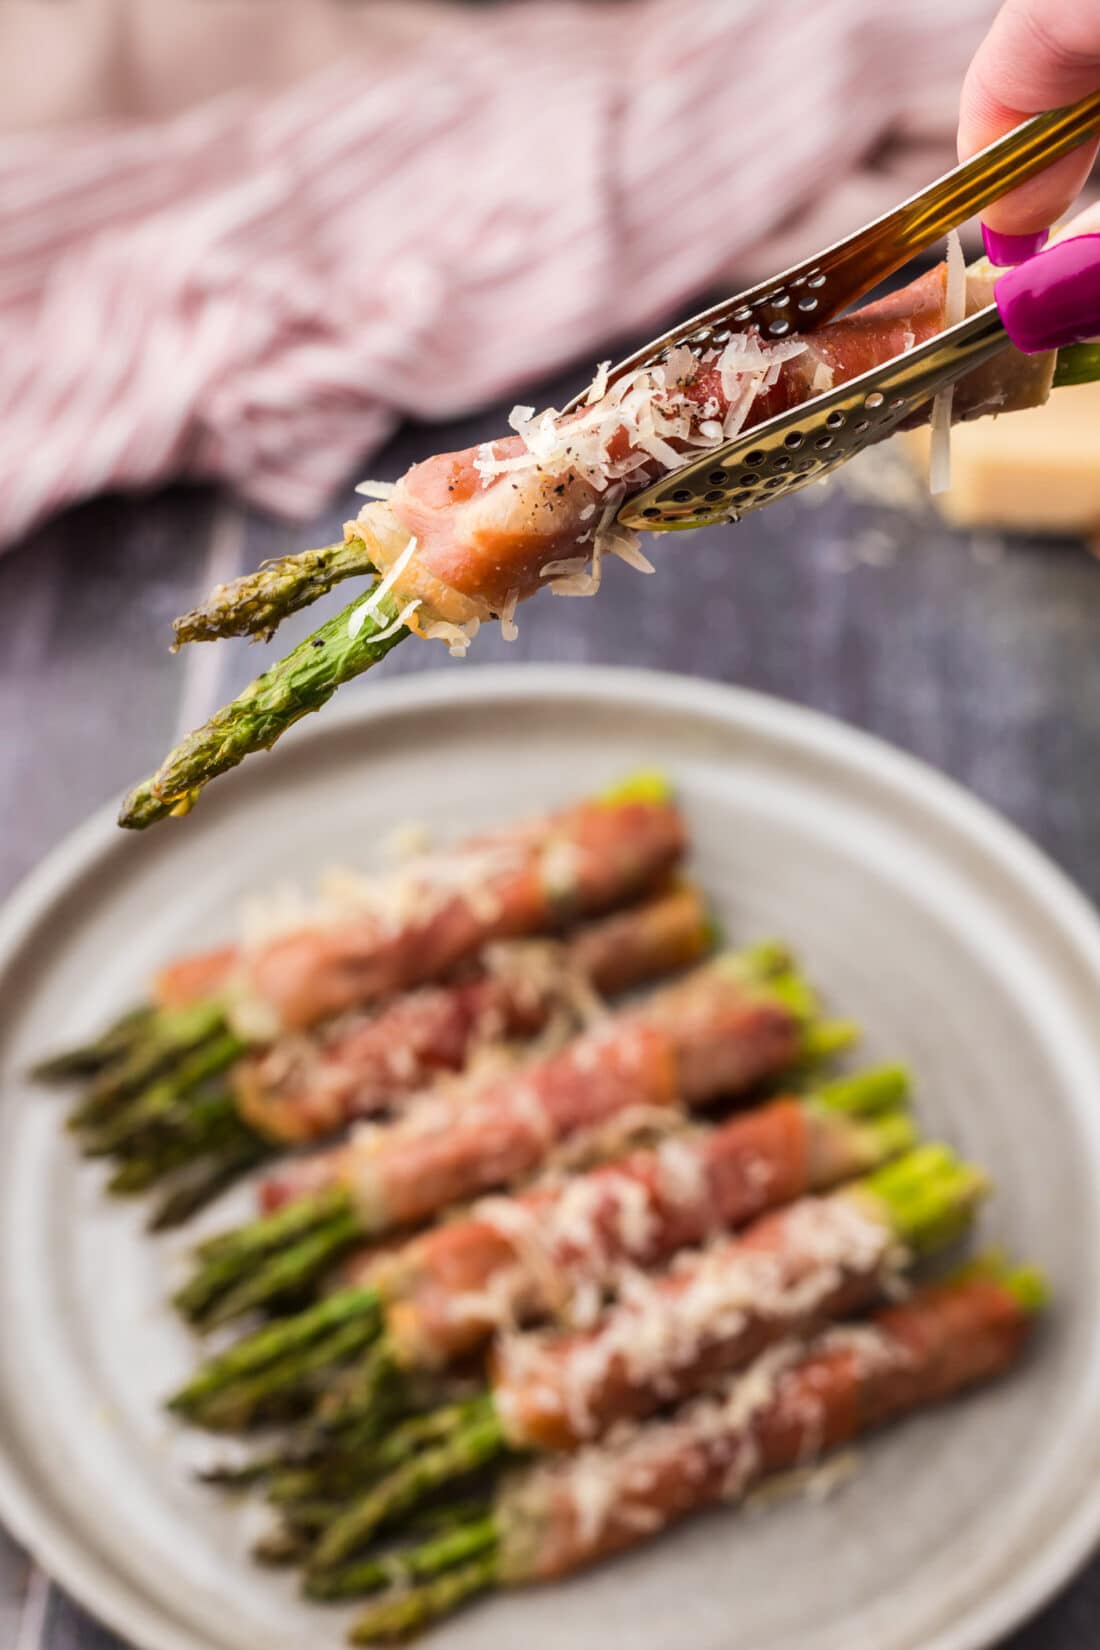 Tongs holding up Prosciutto Wrapped Asparagus